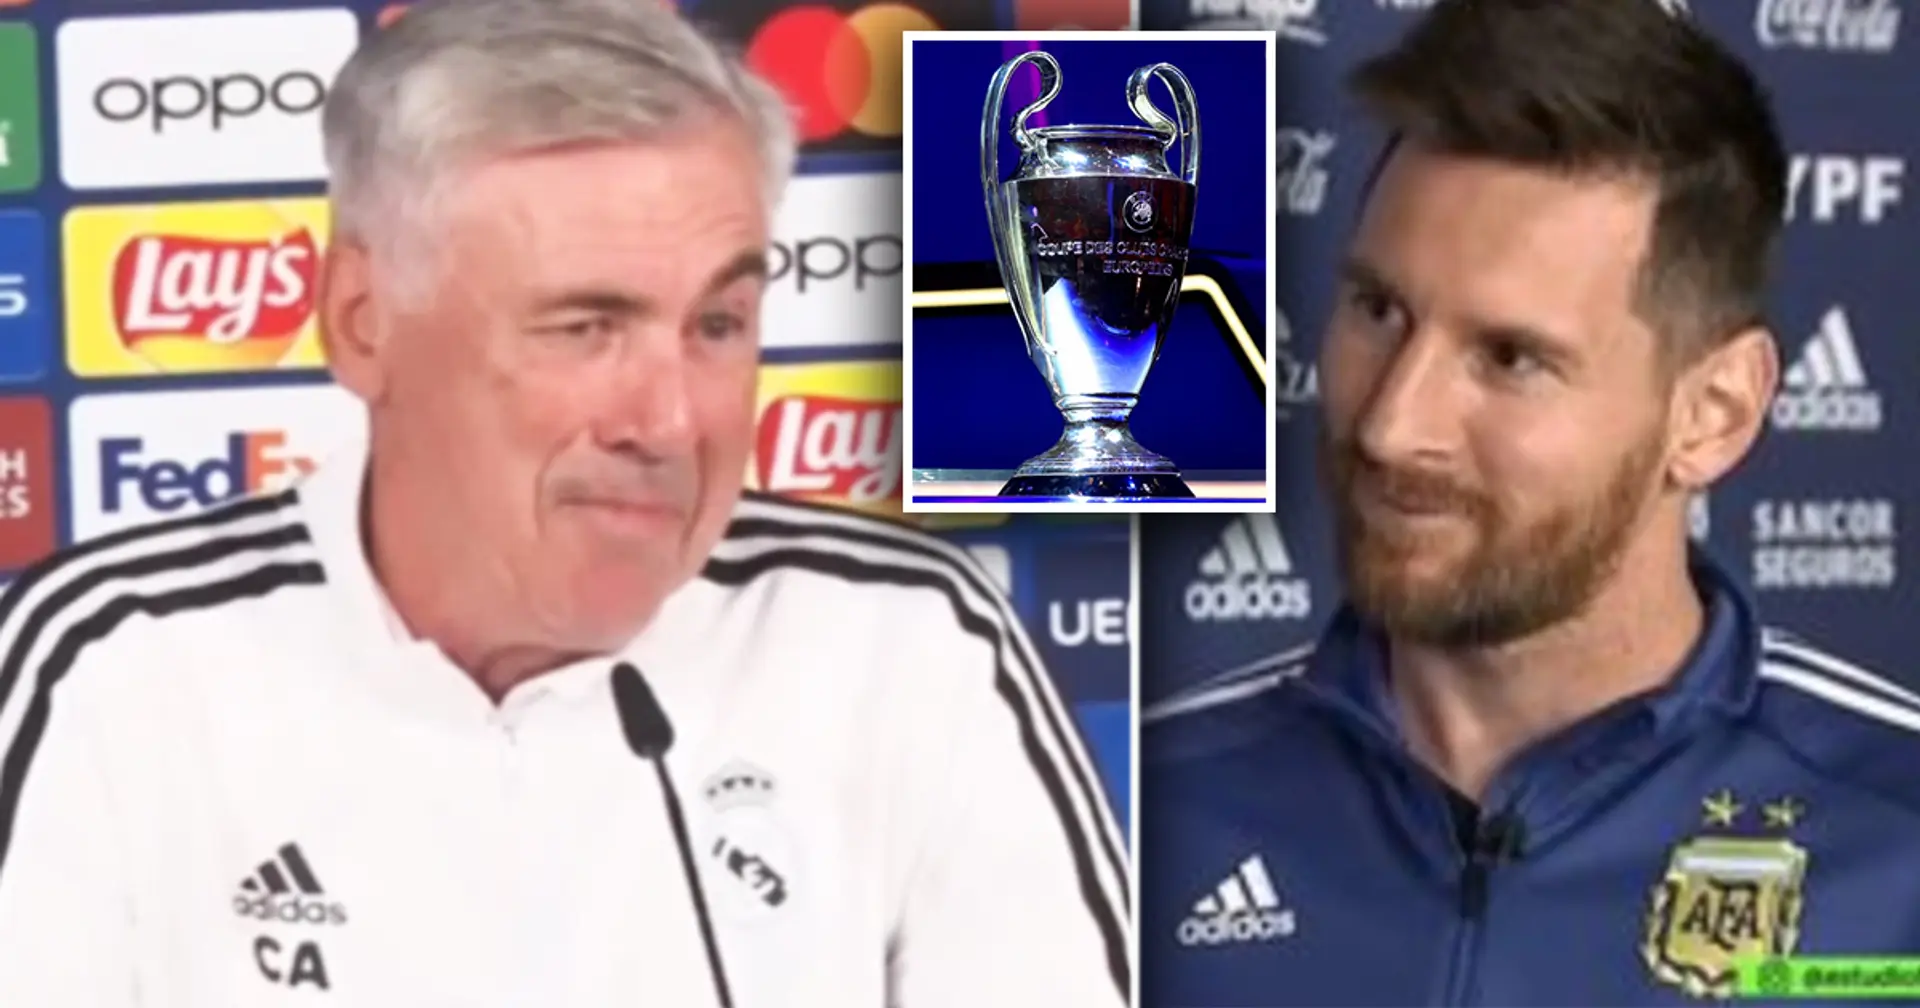 'We were surprised': Ancelotti reacts to Messi's dig at Real Madrid's Champions League win